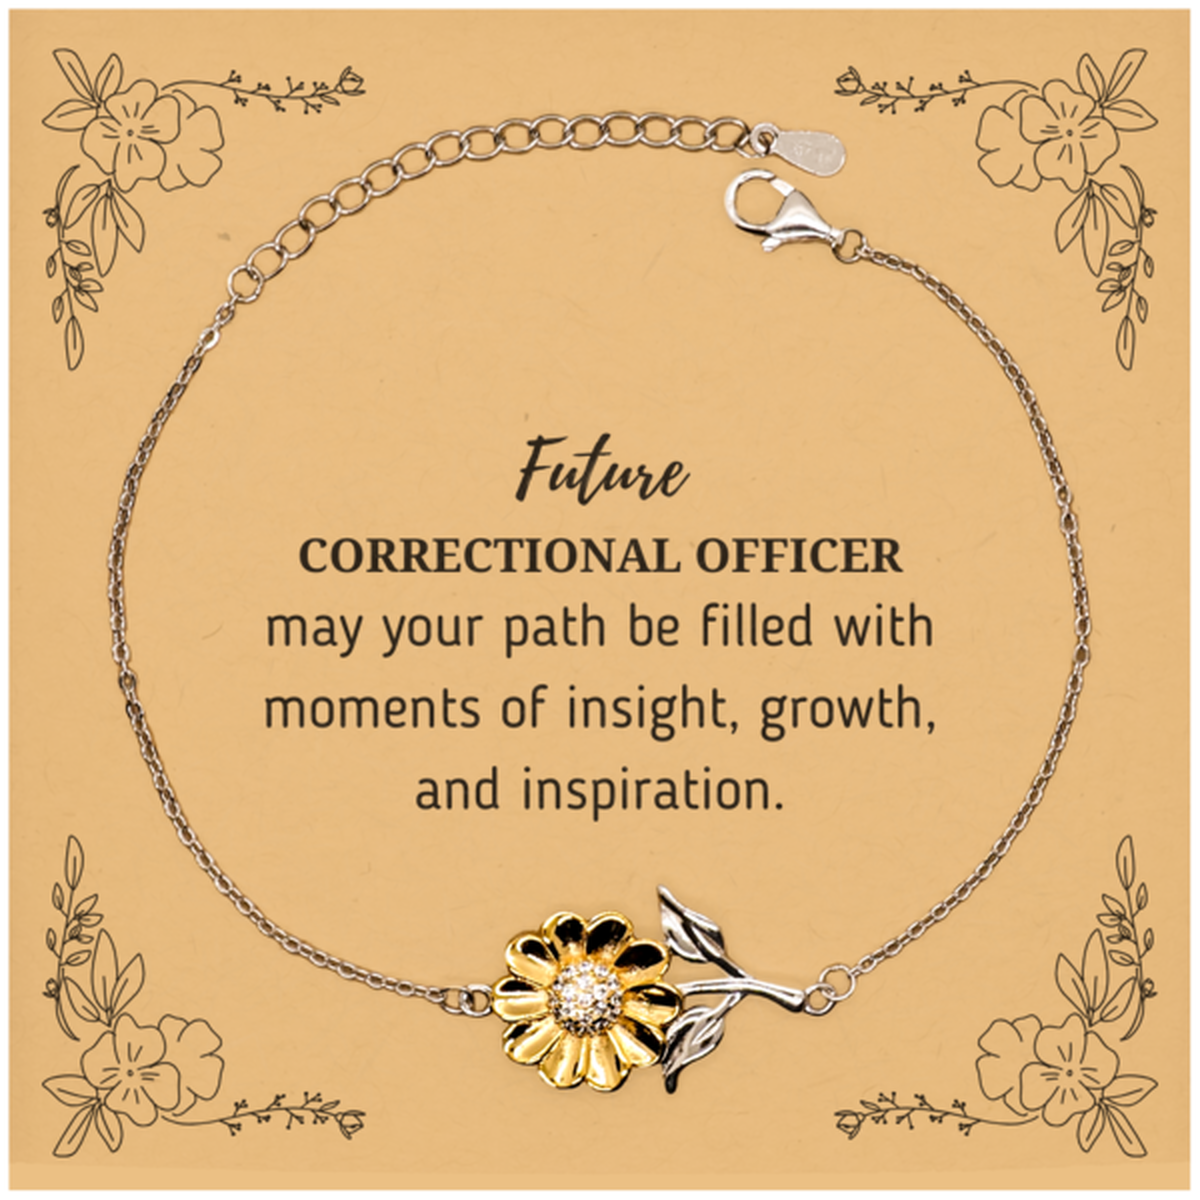 Future Correctional Officer Gifts, May your path be filled with moments of insight, Graduation Gifts for New Correctional Officer, Christmas Unique Sunflower Bracelet For Men, Women, Friends